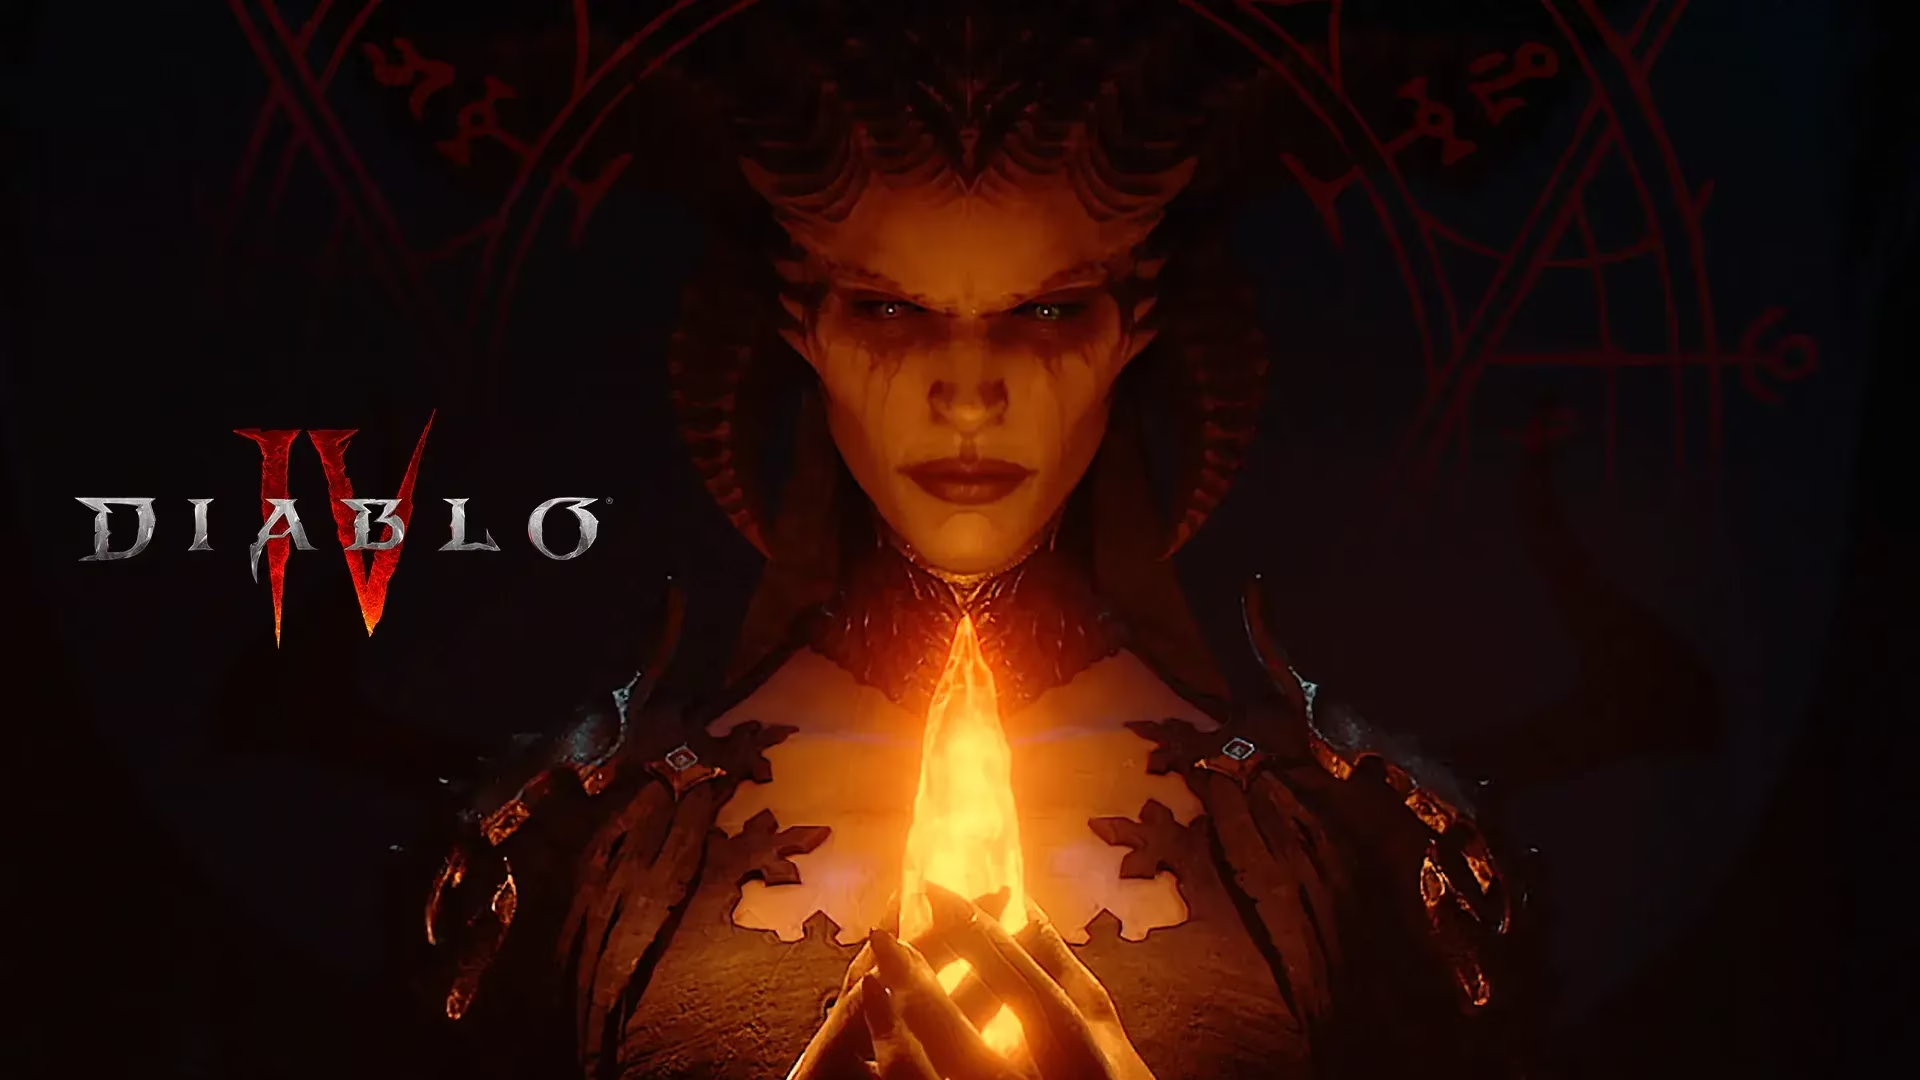 No announcements or details (yet): Diablo IV Season 3 will start on 23rd January